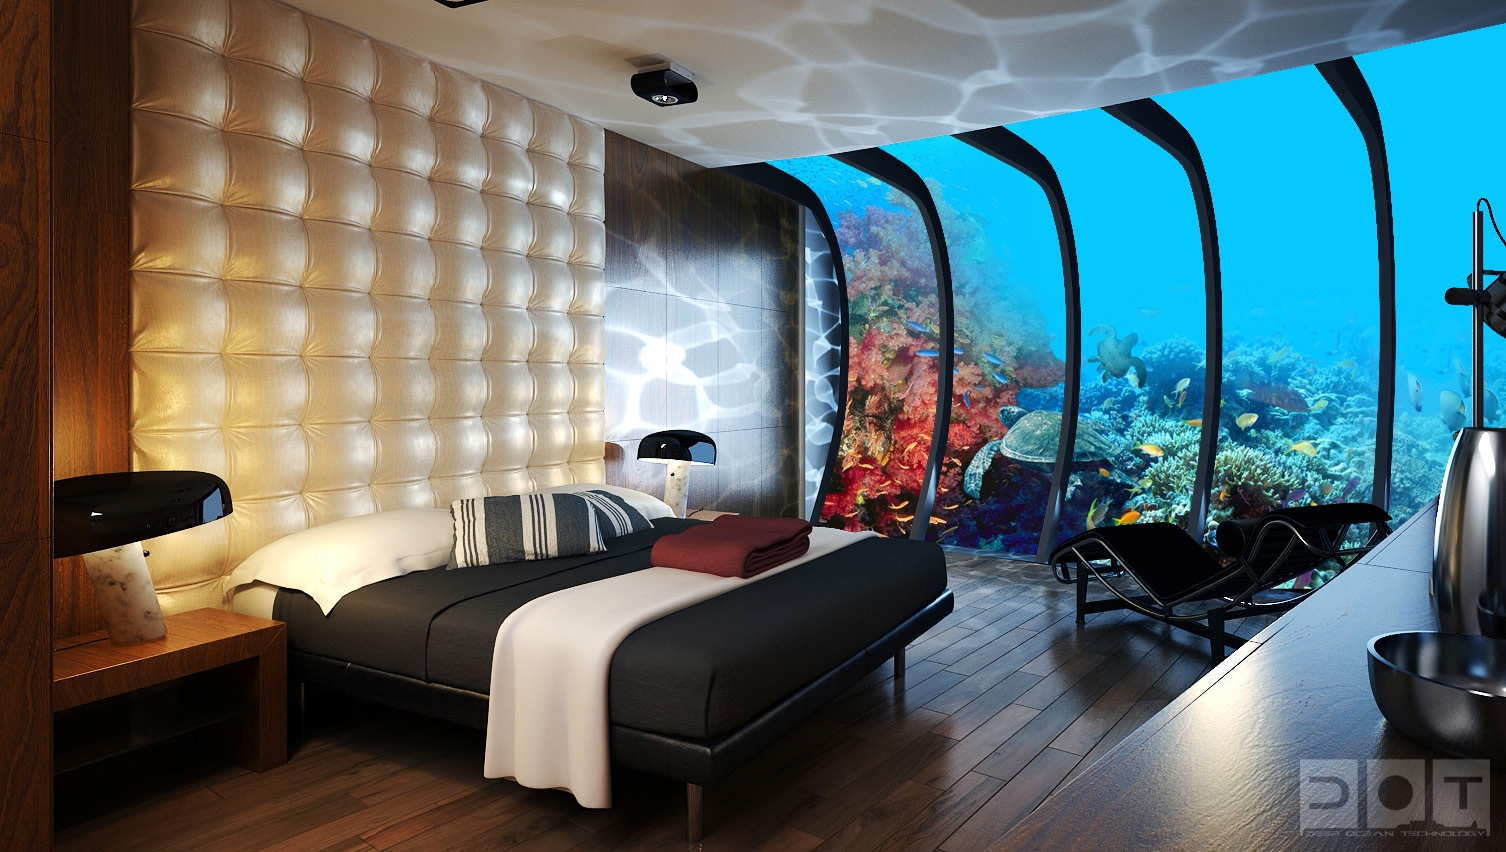 Space Age Underwater Hotel To Be Built Cnn Travel